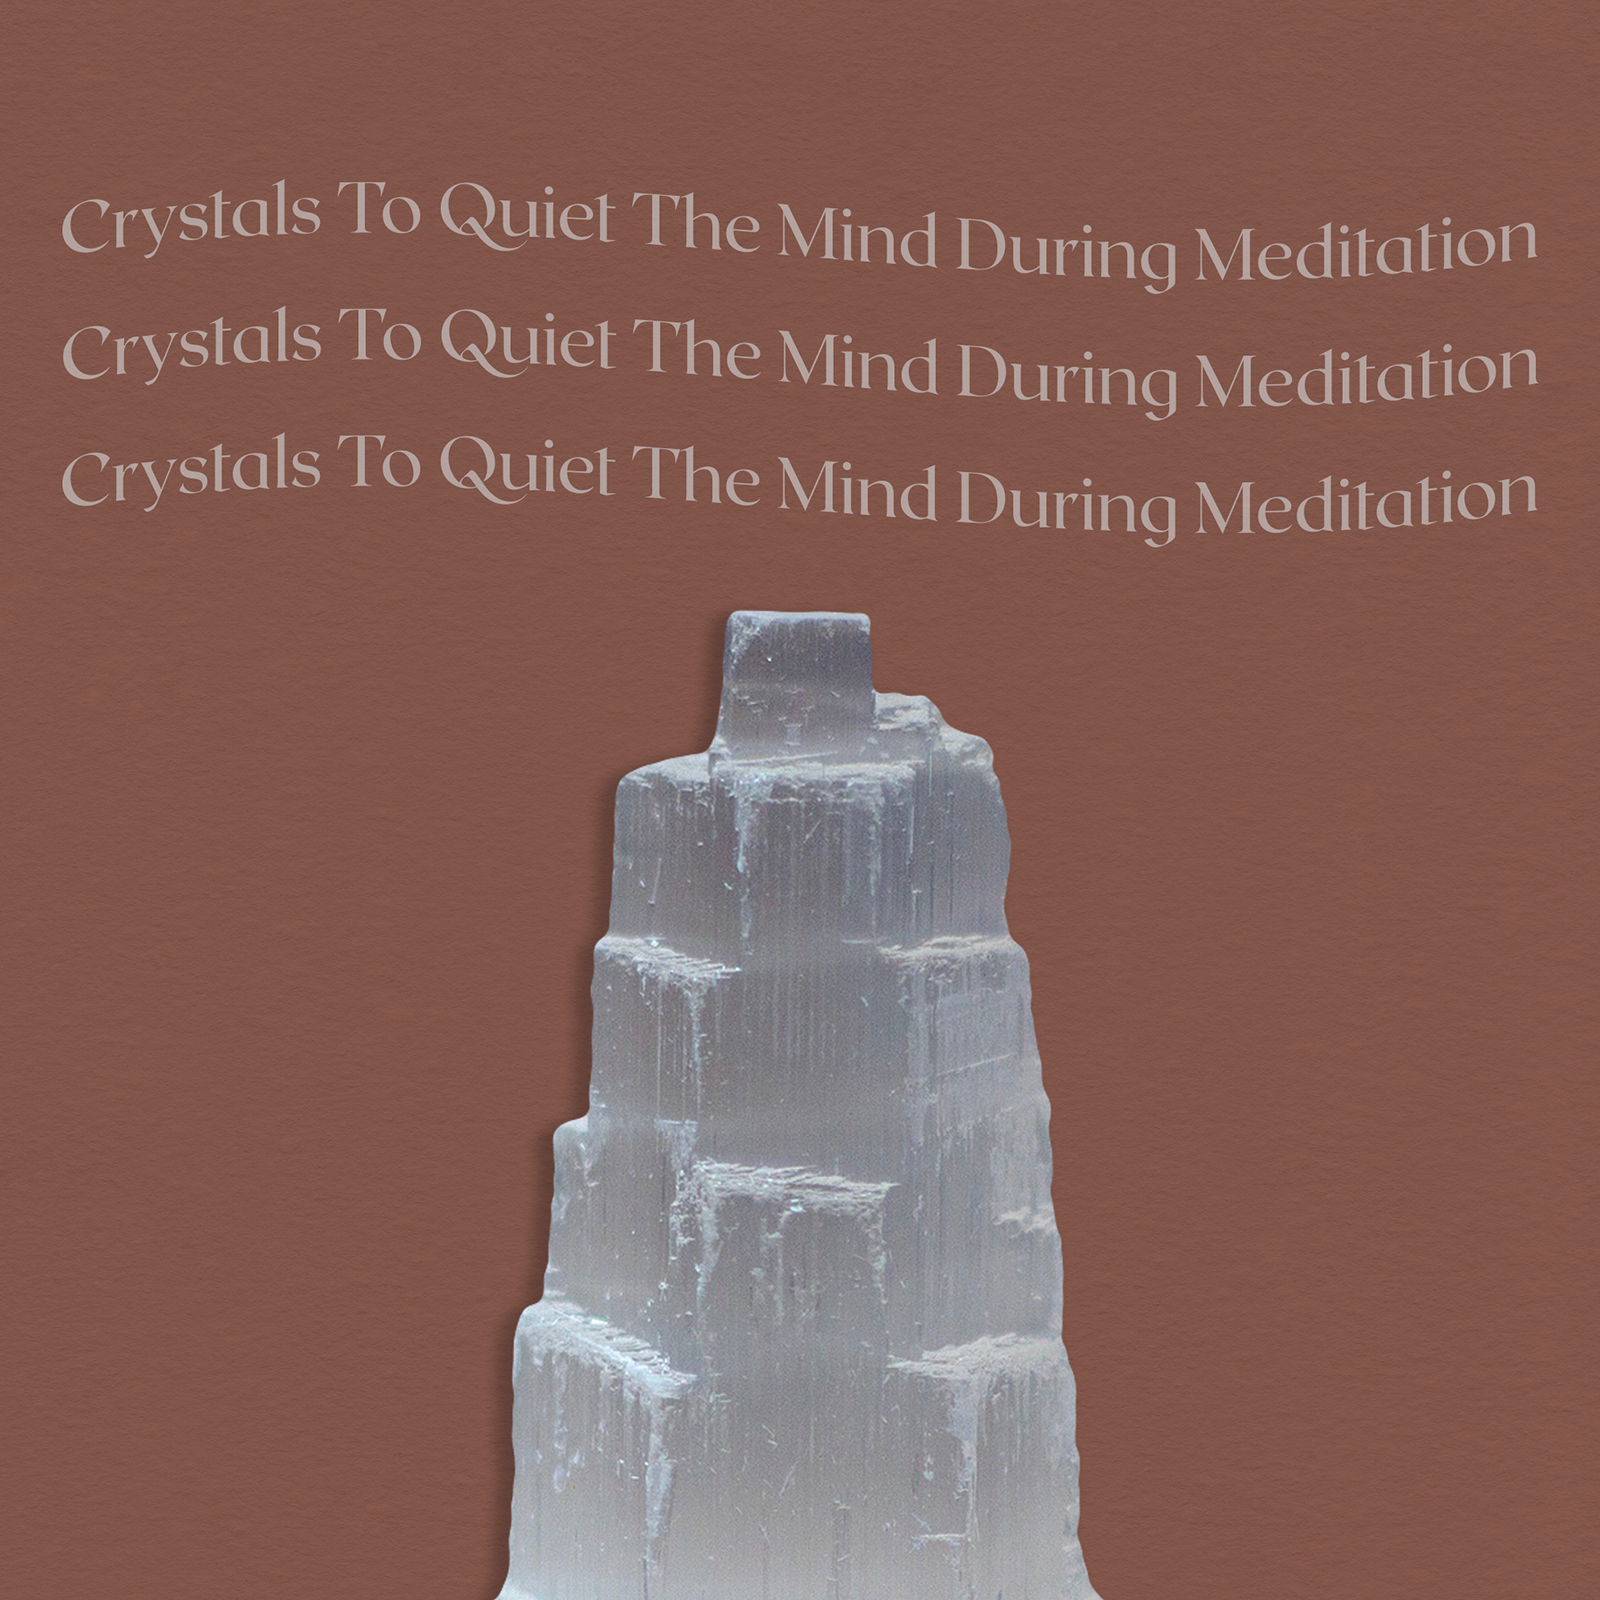 4 Crystals To Quiet The Mind During Meditation